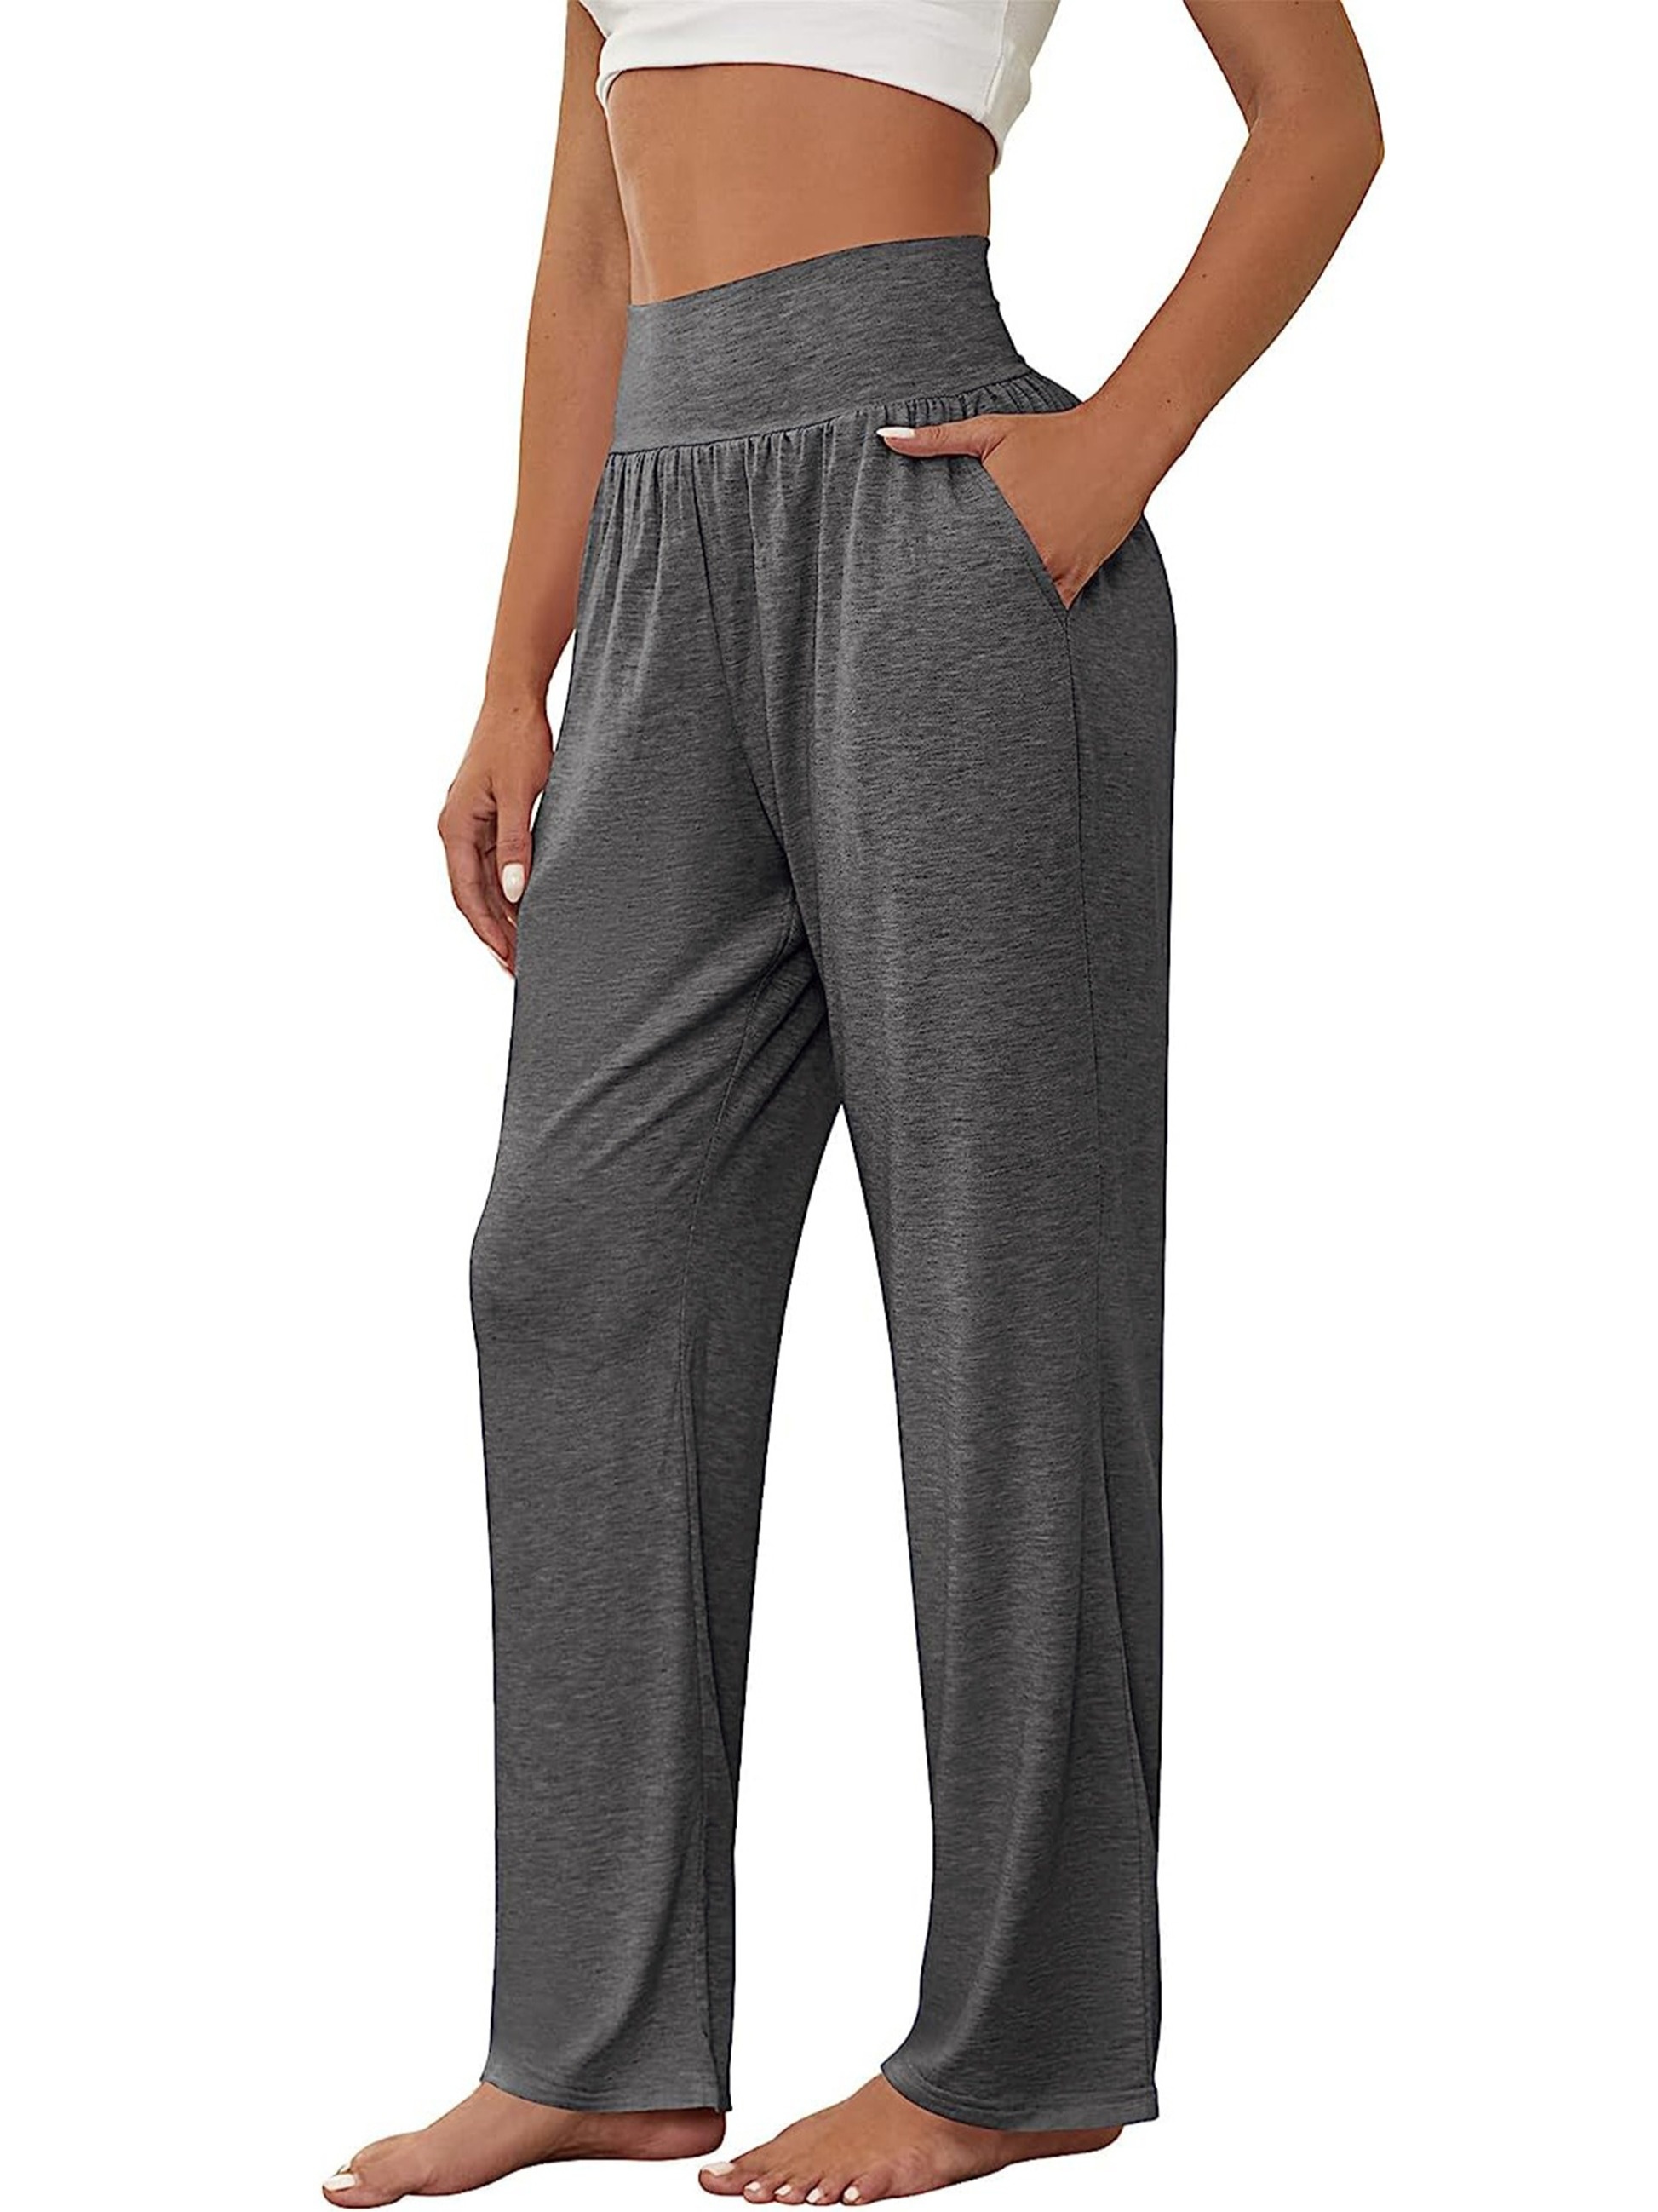 Huukeay 3 Pack Women's Lounge Pants, Cozy Wide Leg Lounge Pants with  Pockets Loose Flowy Yoga Sweatpants Workout Comfy Jogger (Black, Charcoal  Gray, Khaki,Small) at  Women's Clothing store